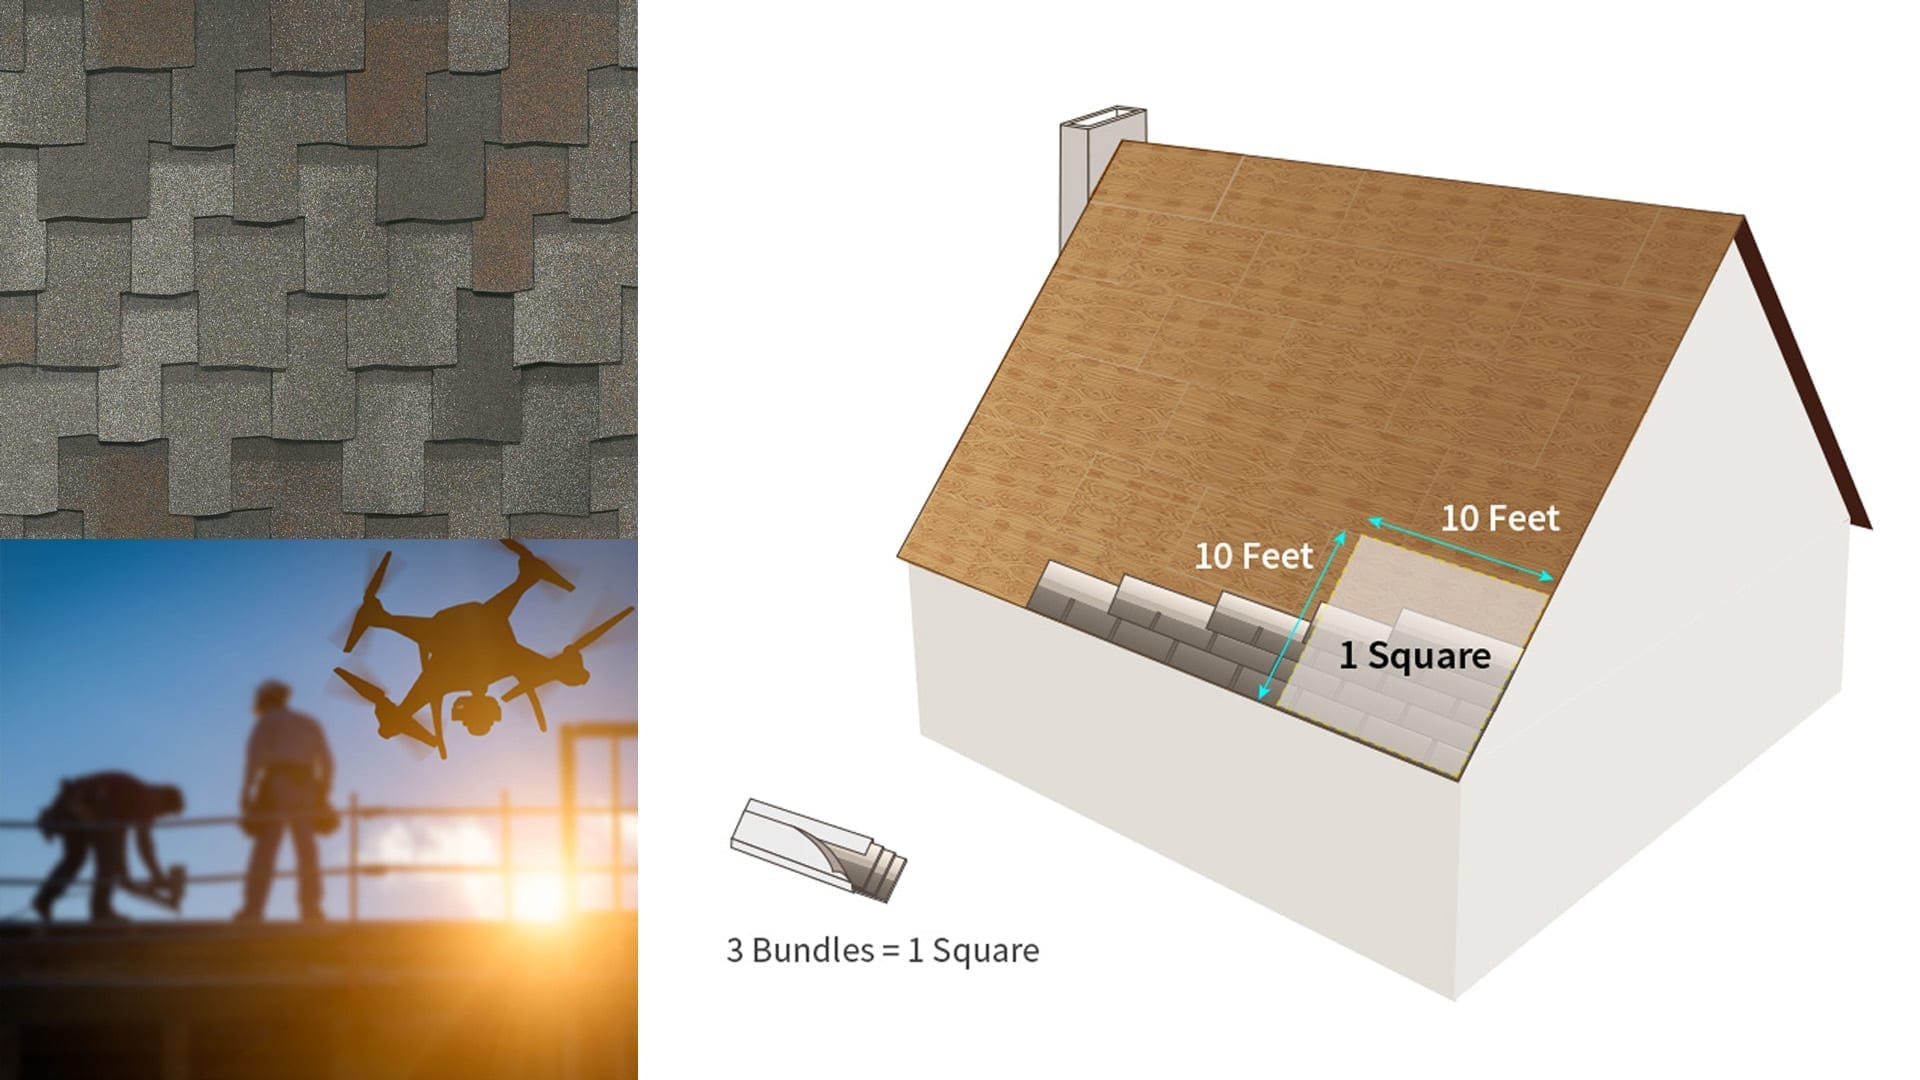 montage of shingles, a drone and roof measurement graphic